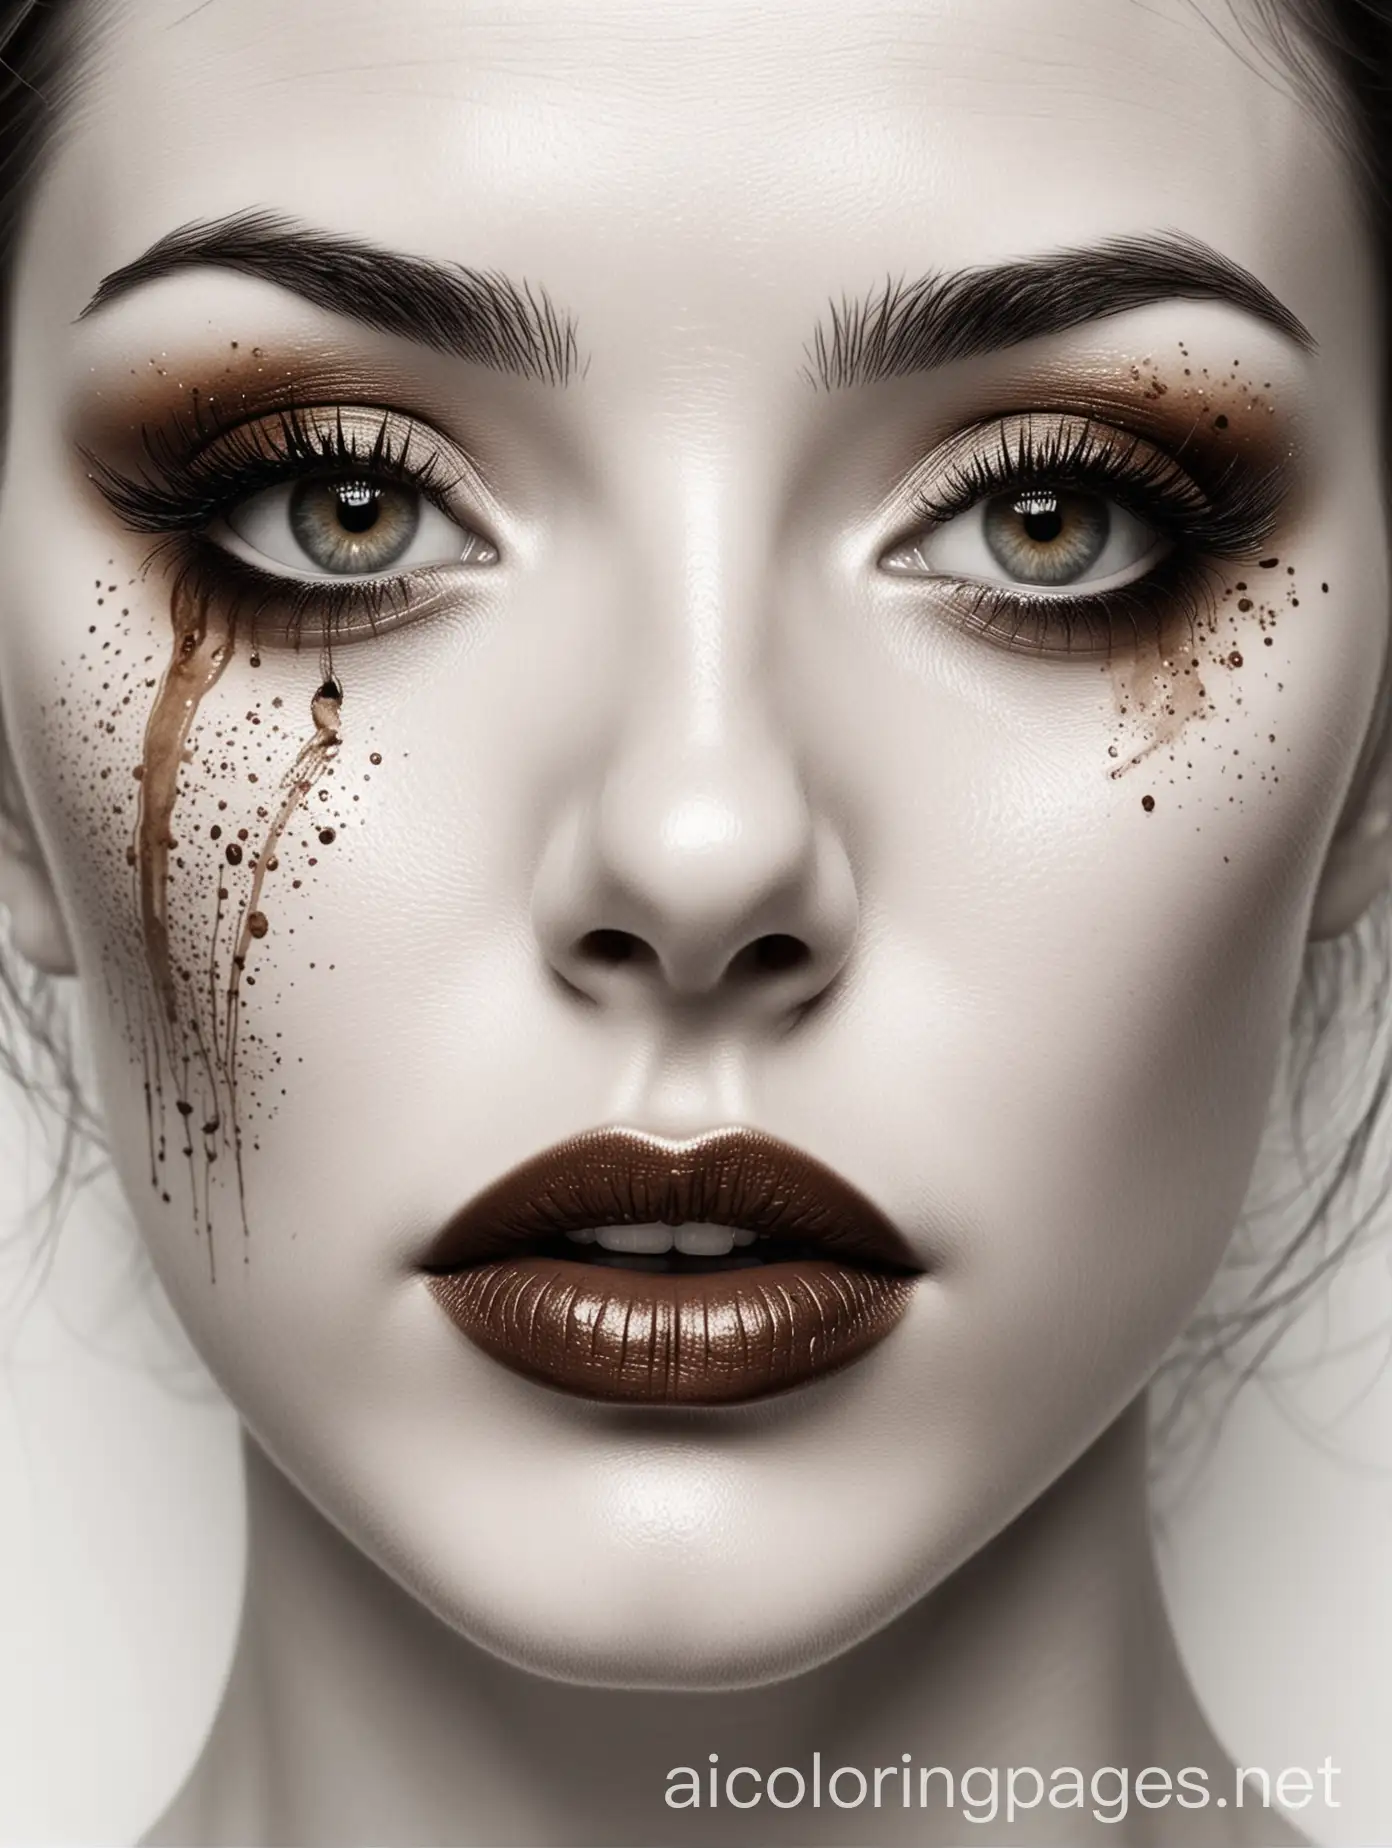 An eye-catching masterpiece of coffee on a white surface, black coffee stains are skillfully manipulated to create a stunning close-up of a woman's face, highlighting her eyes, lips and cheekbones through contrasting shades of white and black. The pure white background highlights the artist's exceptional talent, turning an ordinary accident into a magical work of art , Coloring Page, black and white, line art, white background, Simplicity, Ample White Space.